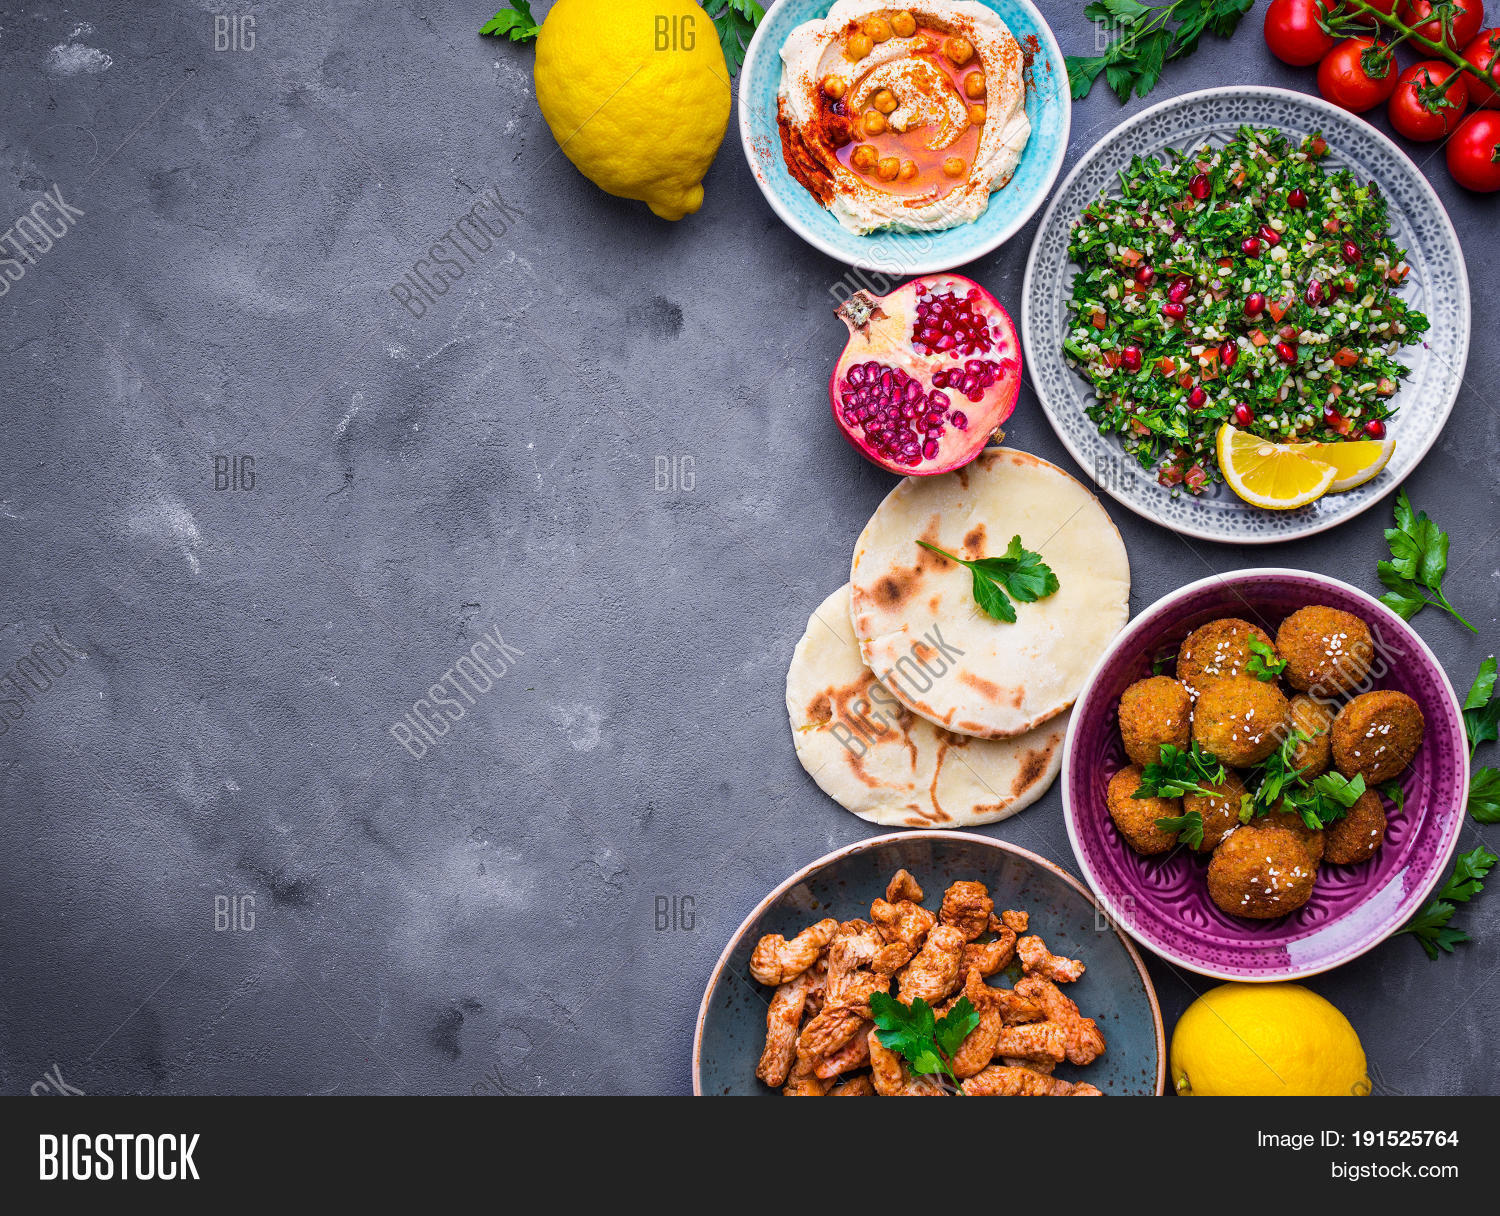 Middle Eastern Dishes Image Photo Trial Bigstock